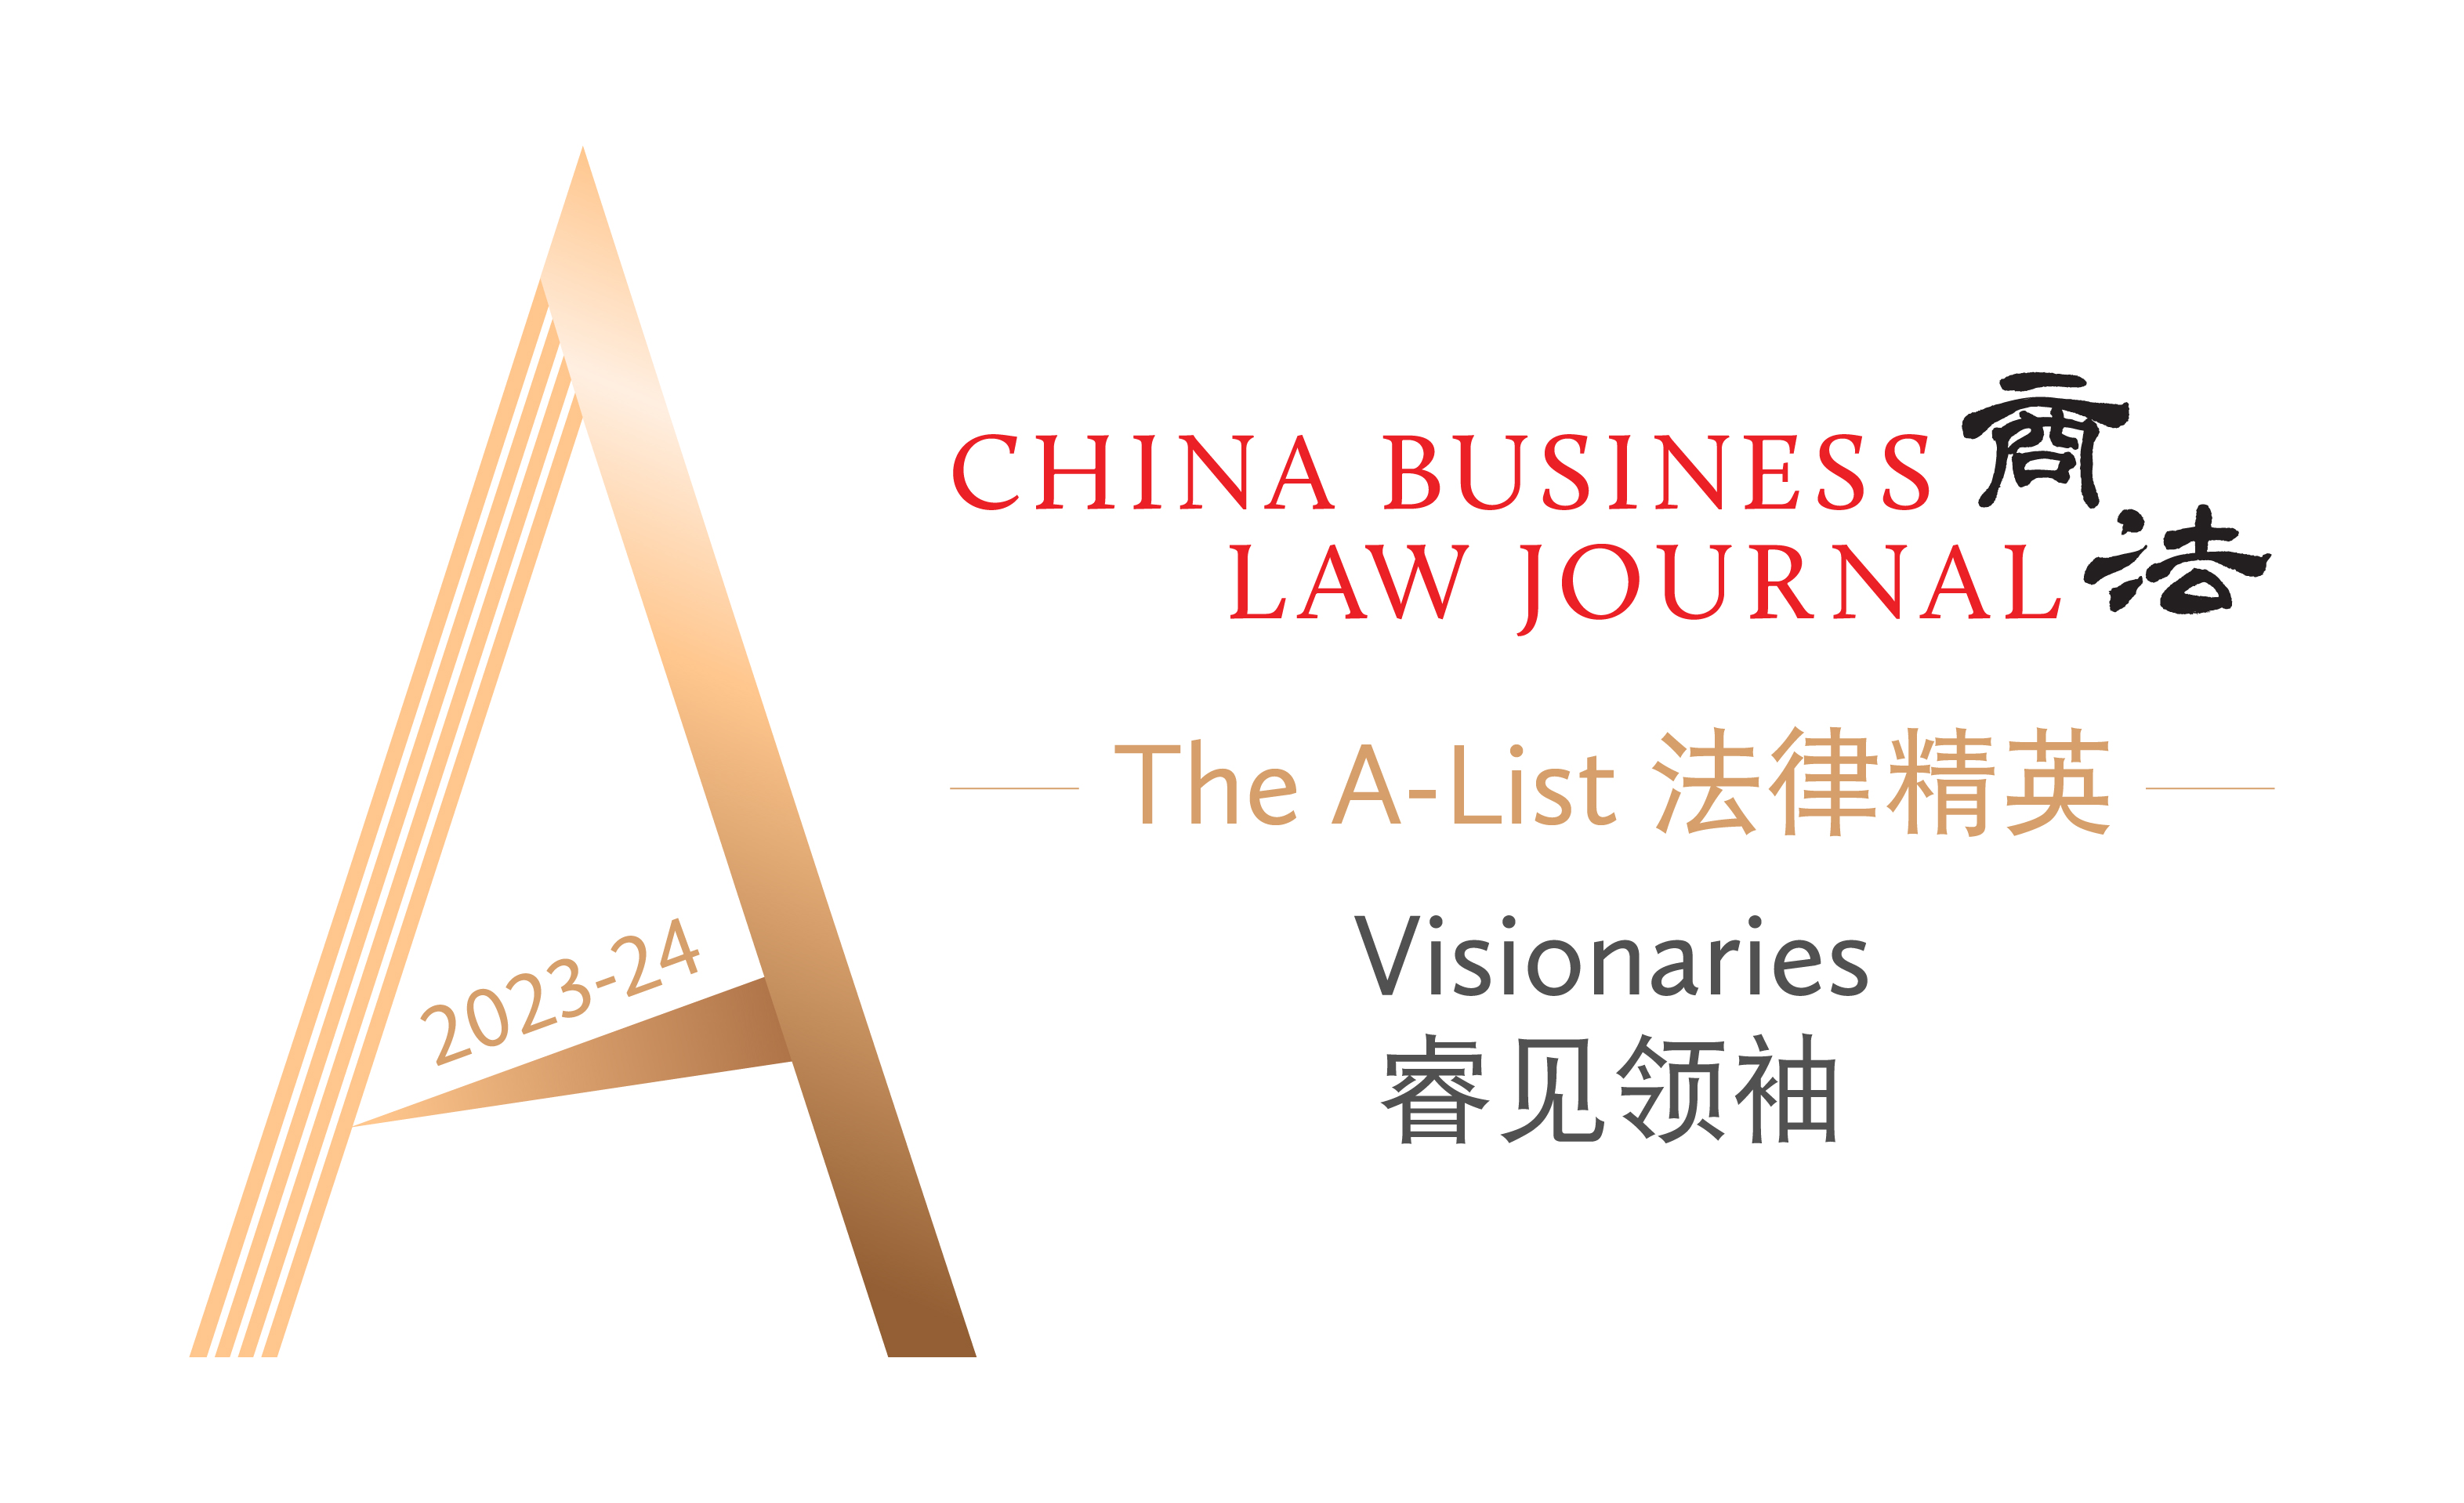 Rossana Chu is recognised as one of the A-List 2023-24: the Visionaries by CBLJ.